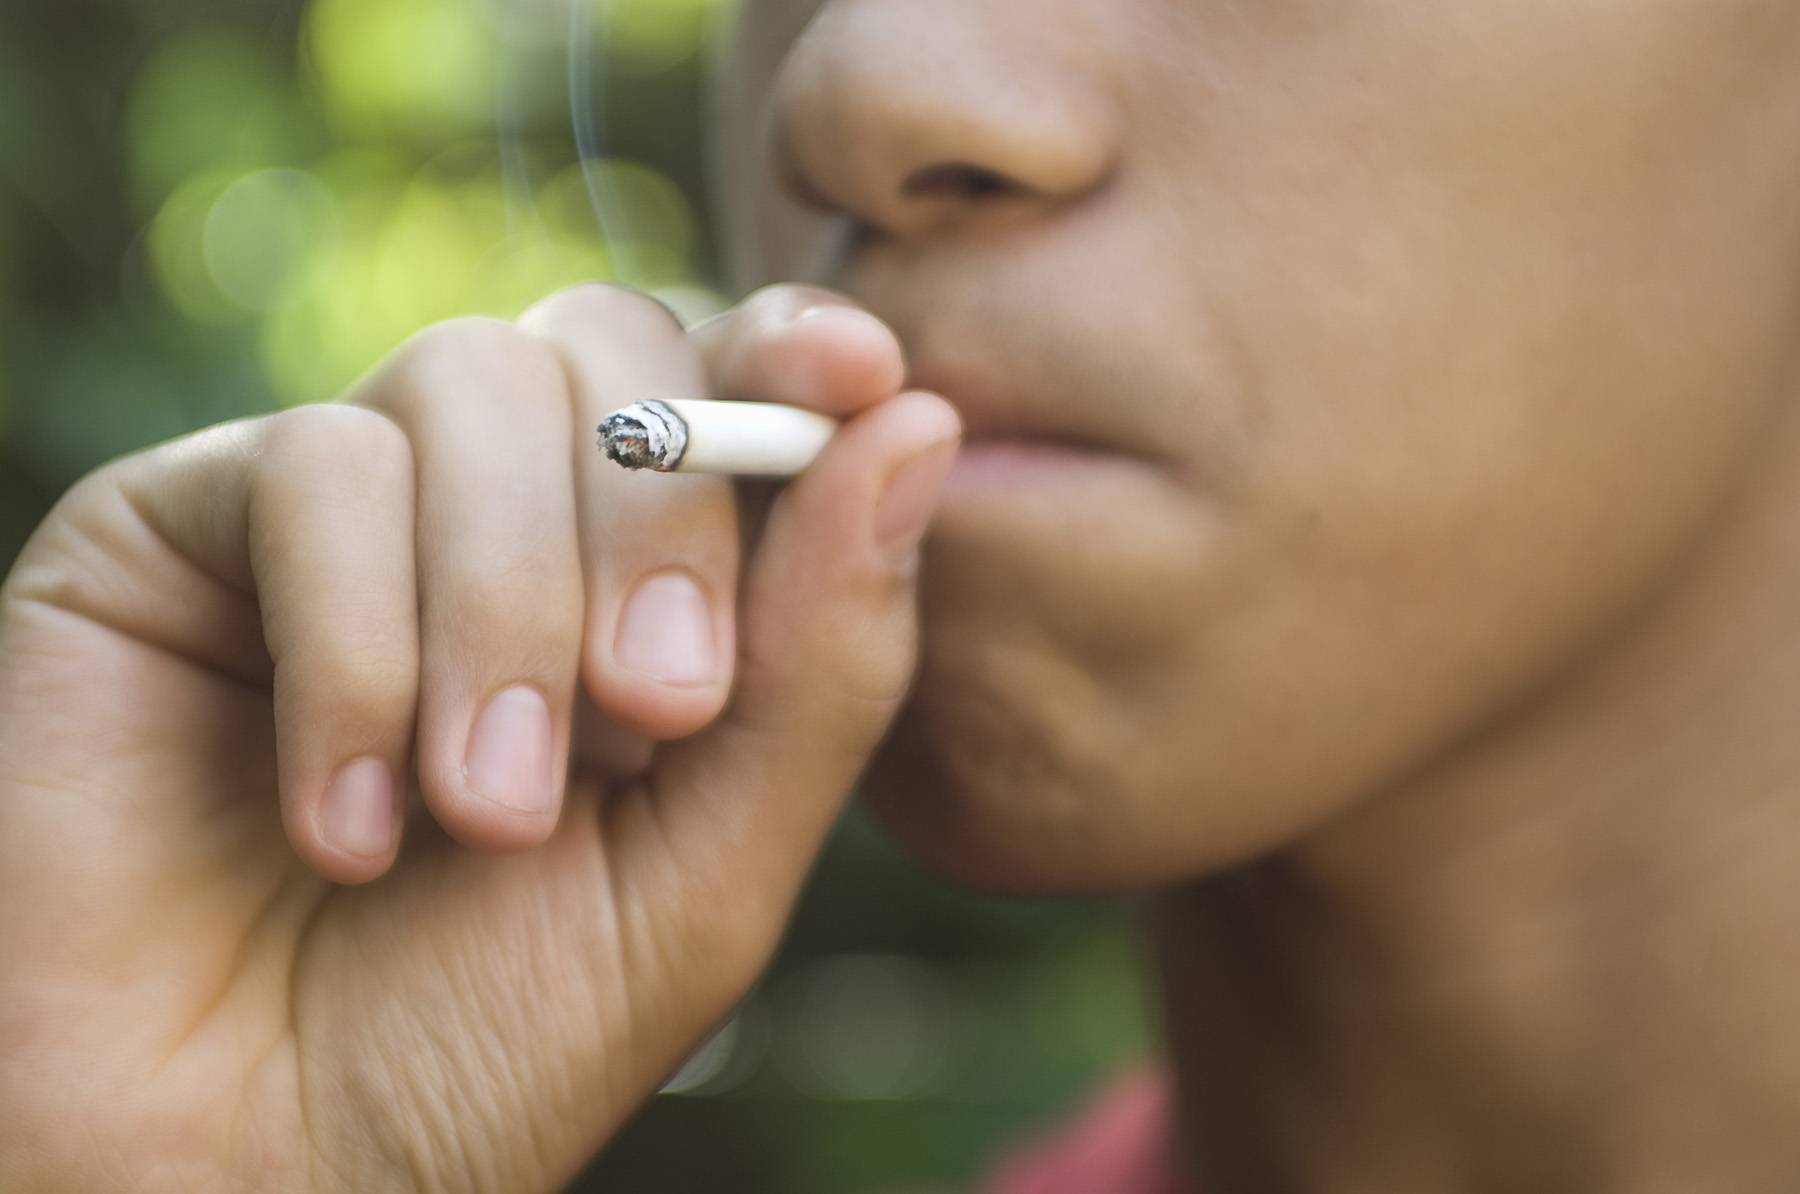 More Families Banning Smoking in Their Homes